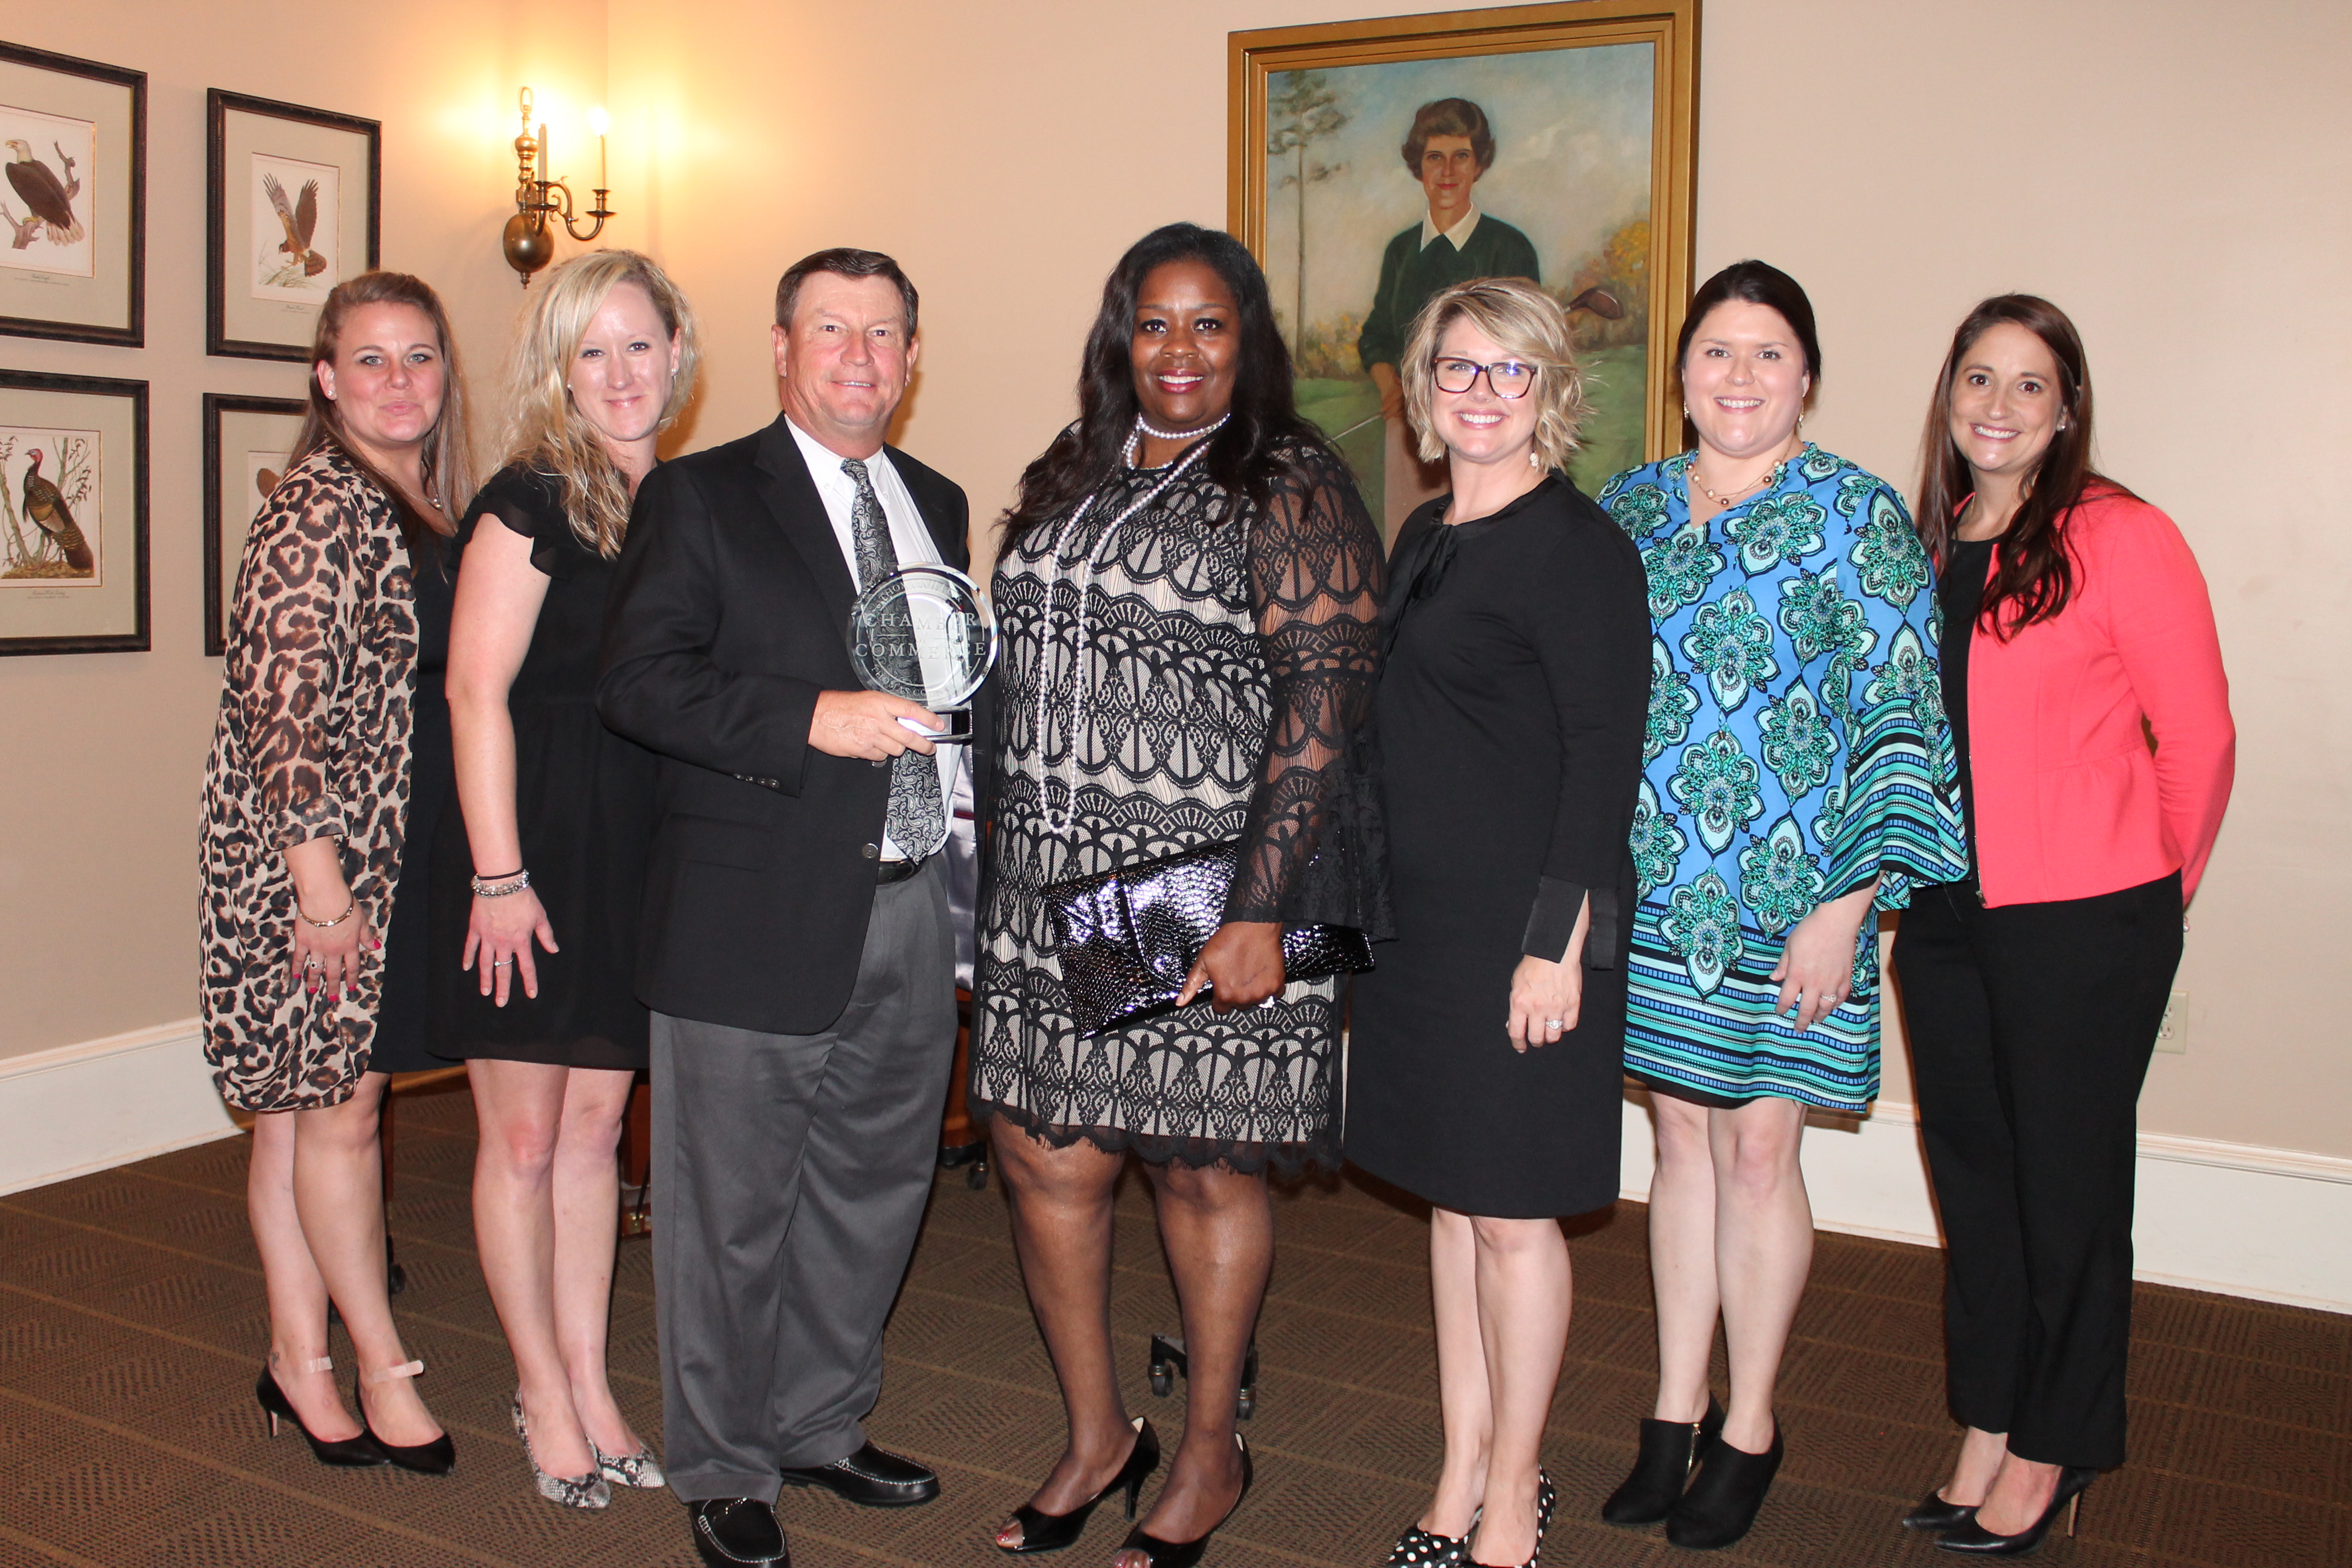 Photo for Southern Regional Technical College named the Large Business of the Year by the Thomasville - Thomas County Chamber of Commerce